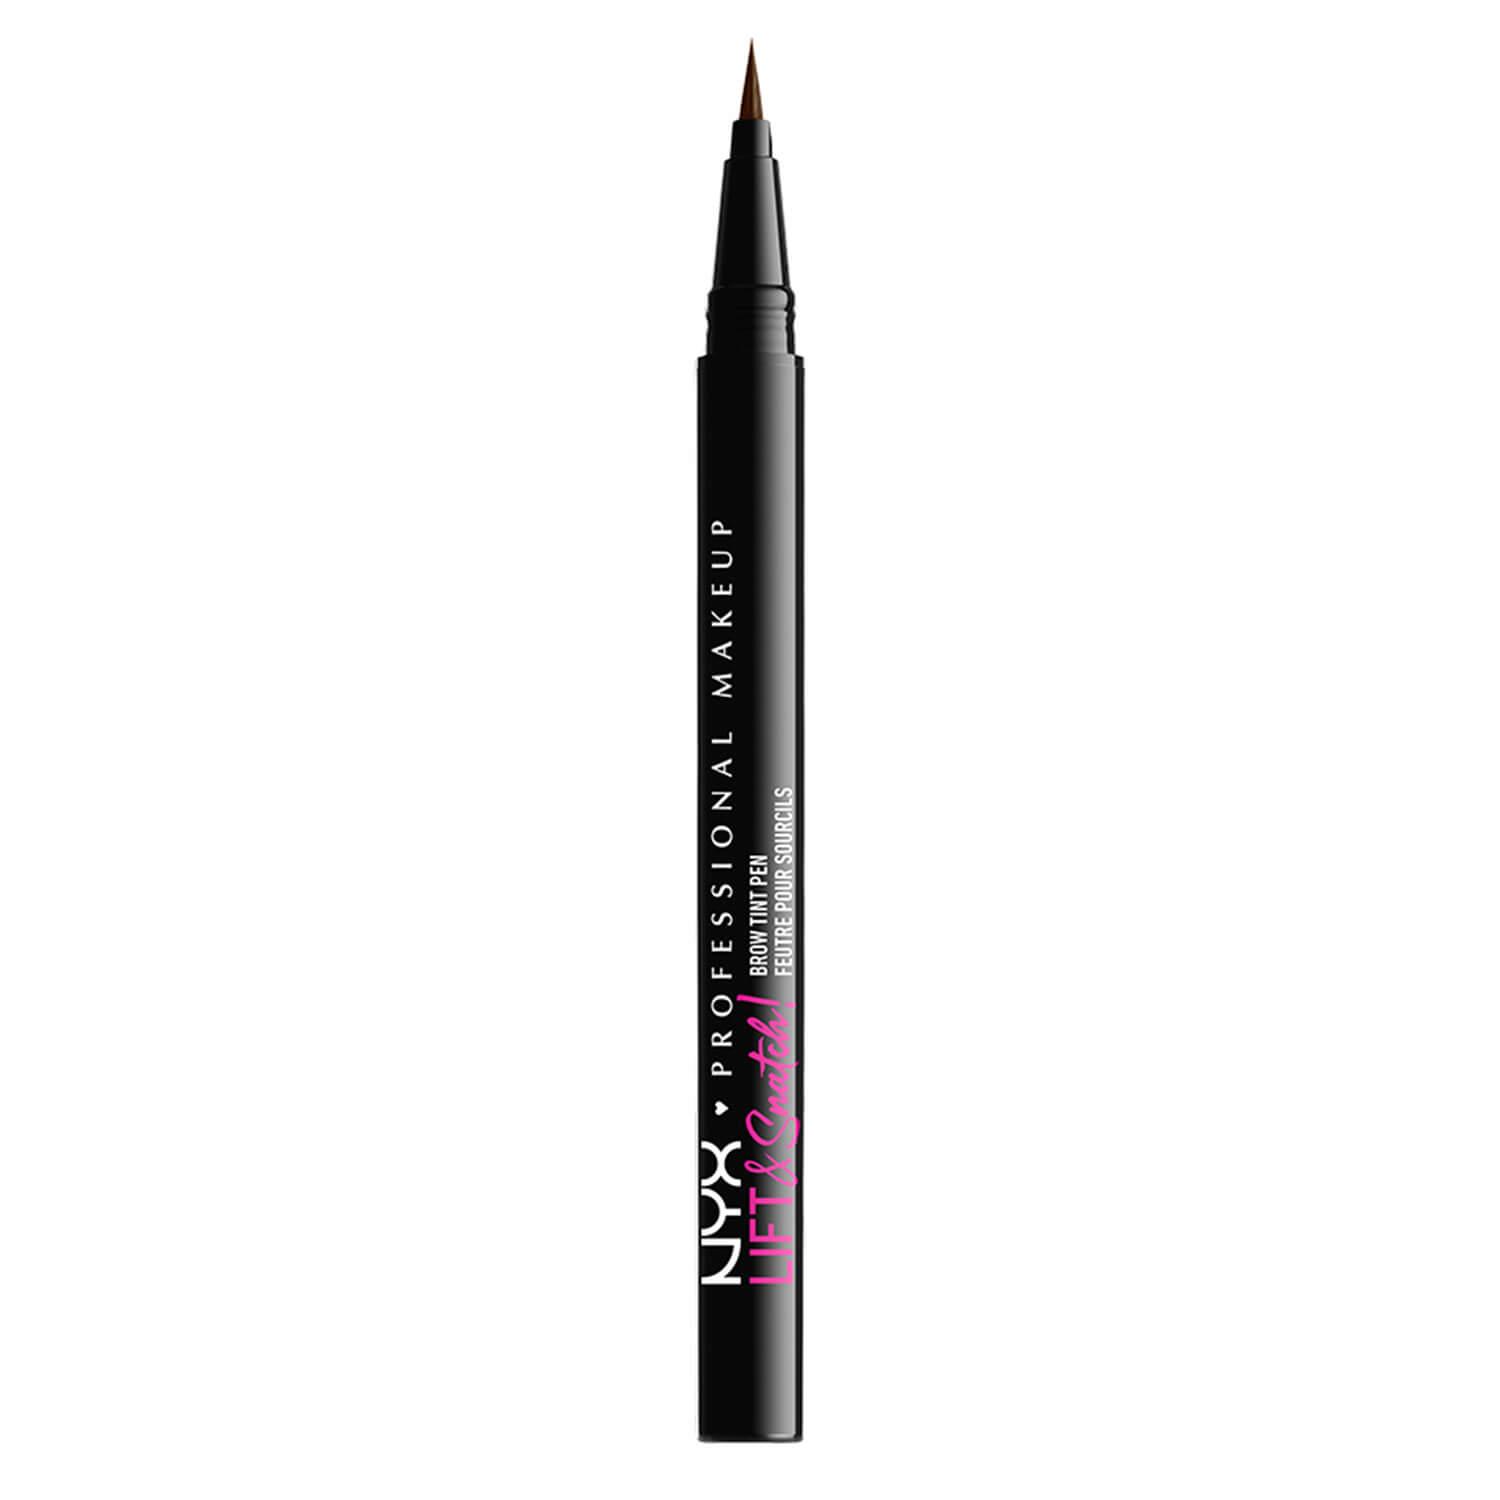 NYX Brows - Lift & Snatch! Brow Tint Pen Espresso 08